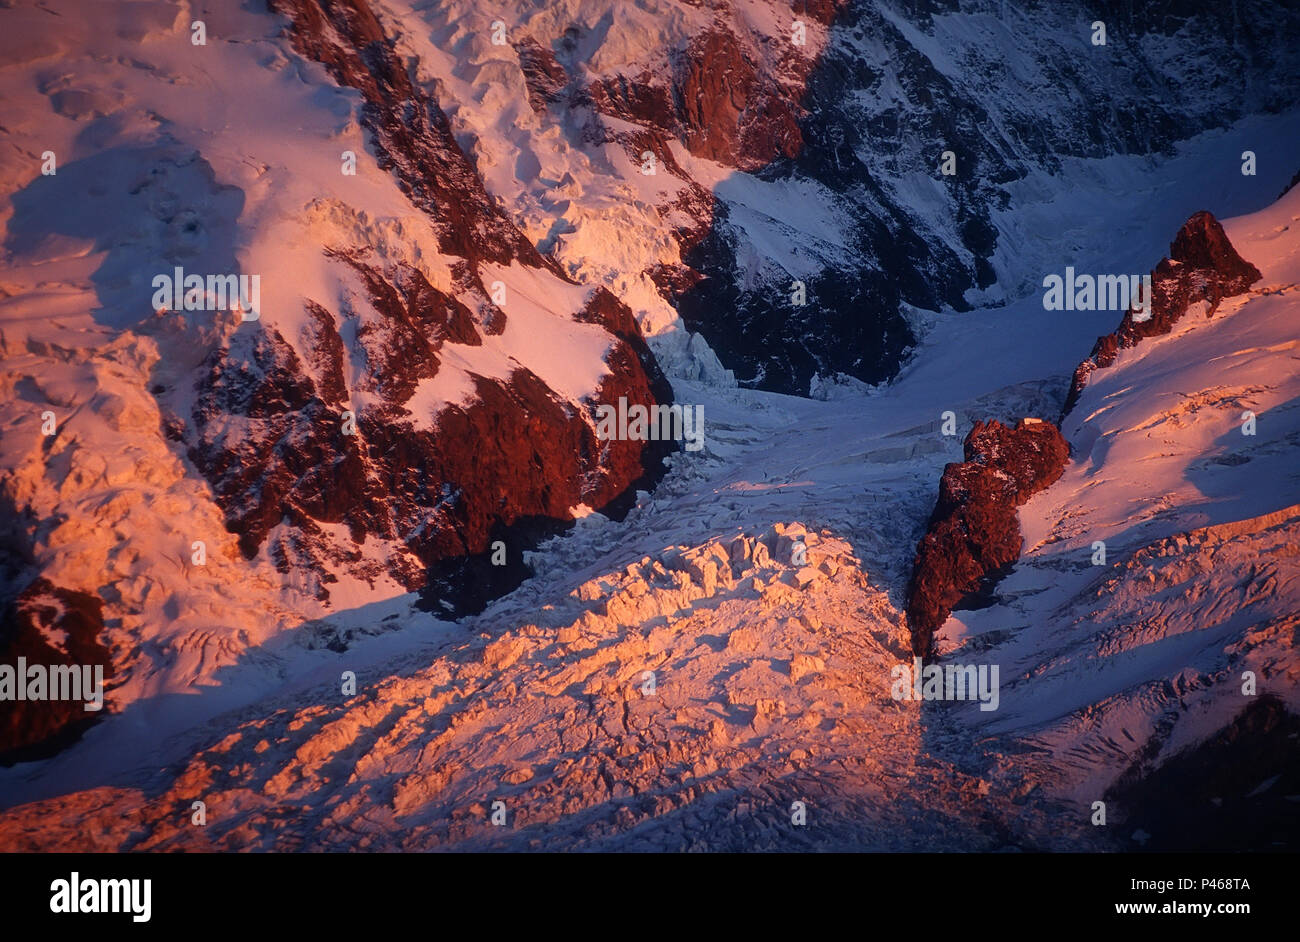 Alpenglow colours La Jonction and the Glacier des Bossons pink, with the Grands Mulets mountain hut visible on the rock island Stock Photo